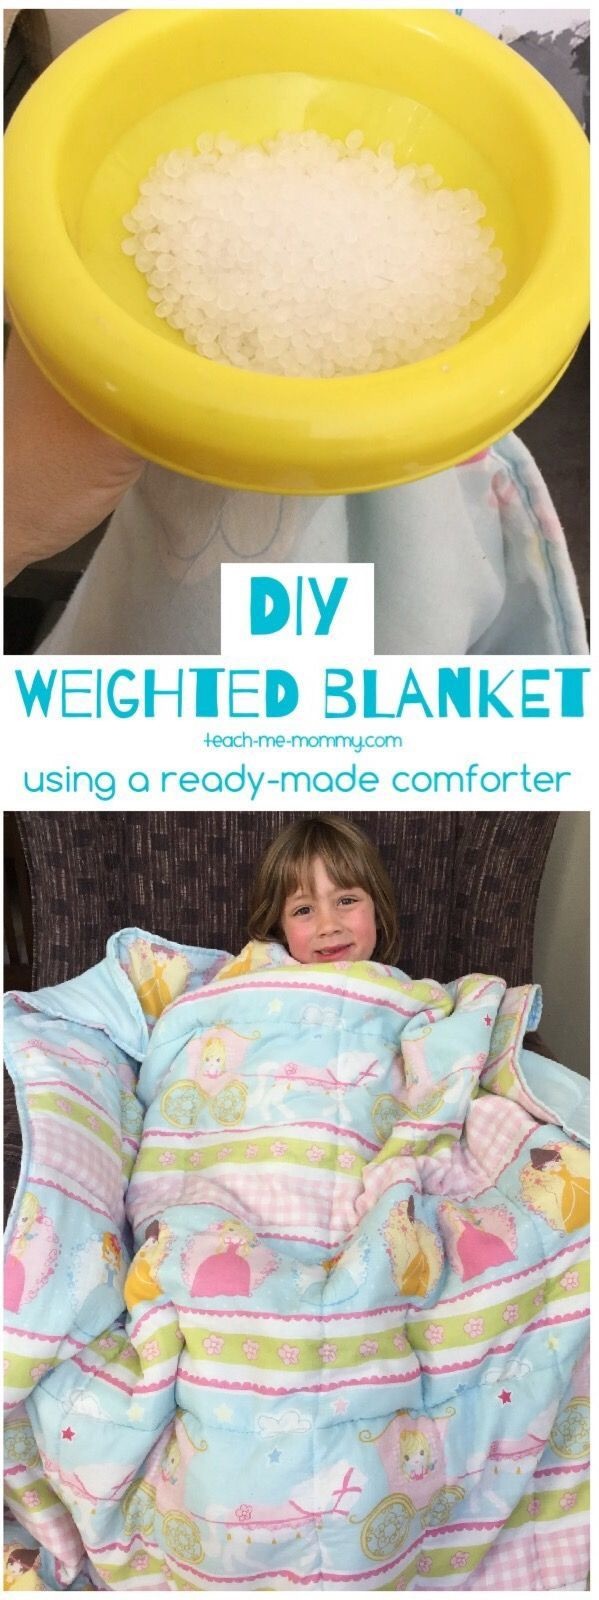 Weighted Blanket For Adults DIY
 DIY Weighted Blanket